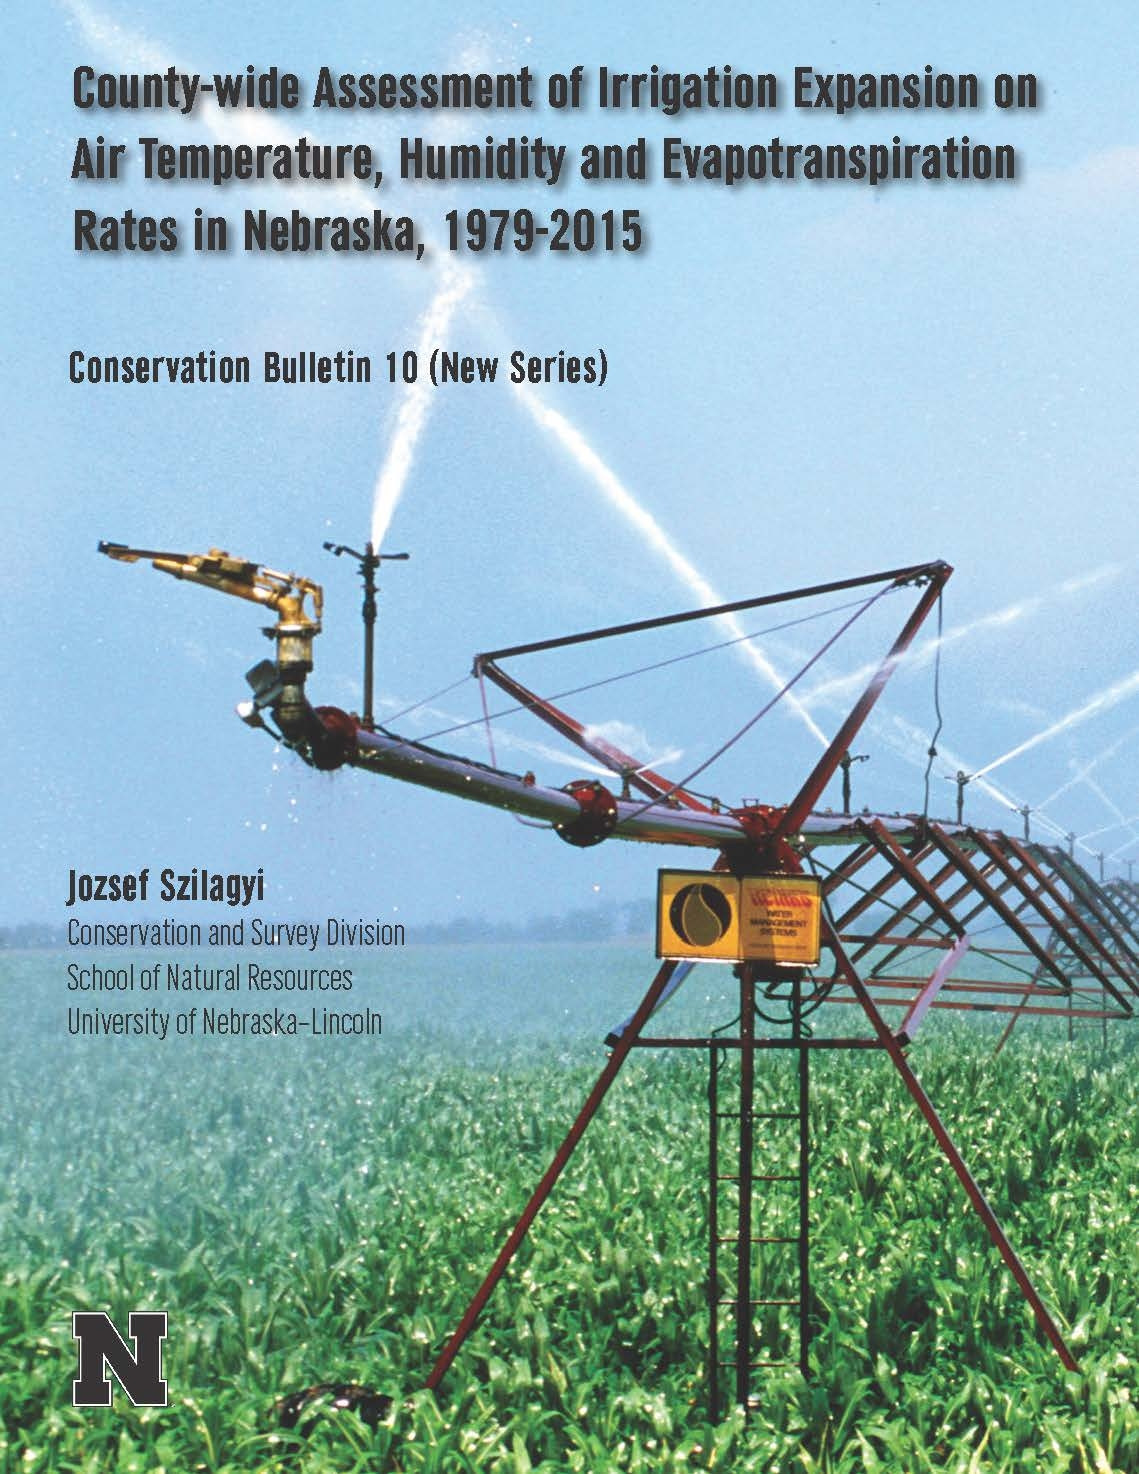 County-wide Assessment of Irrigation Expansion on Air Temperature, Humidity and Evapotranspiration Rates in Nebraska, 1979-2015 (CB-10(NS))